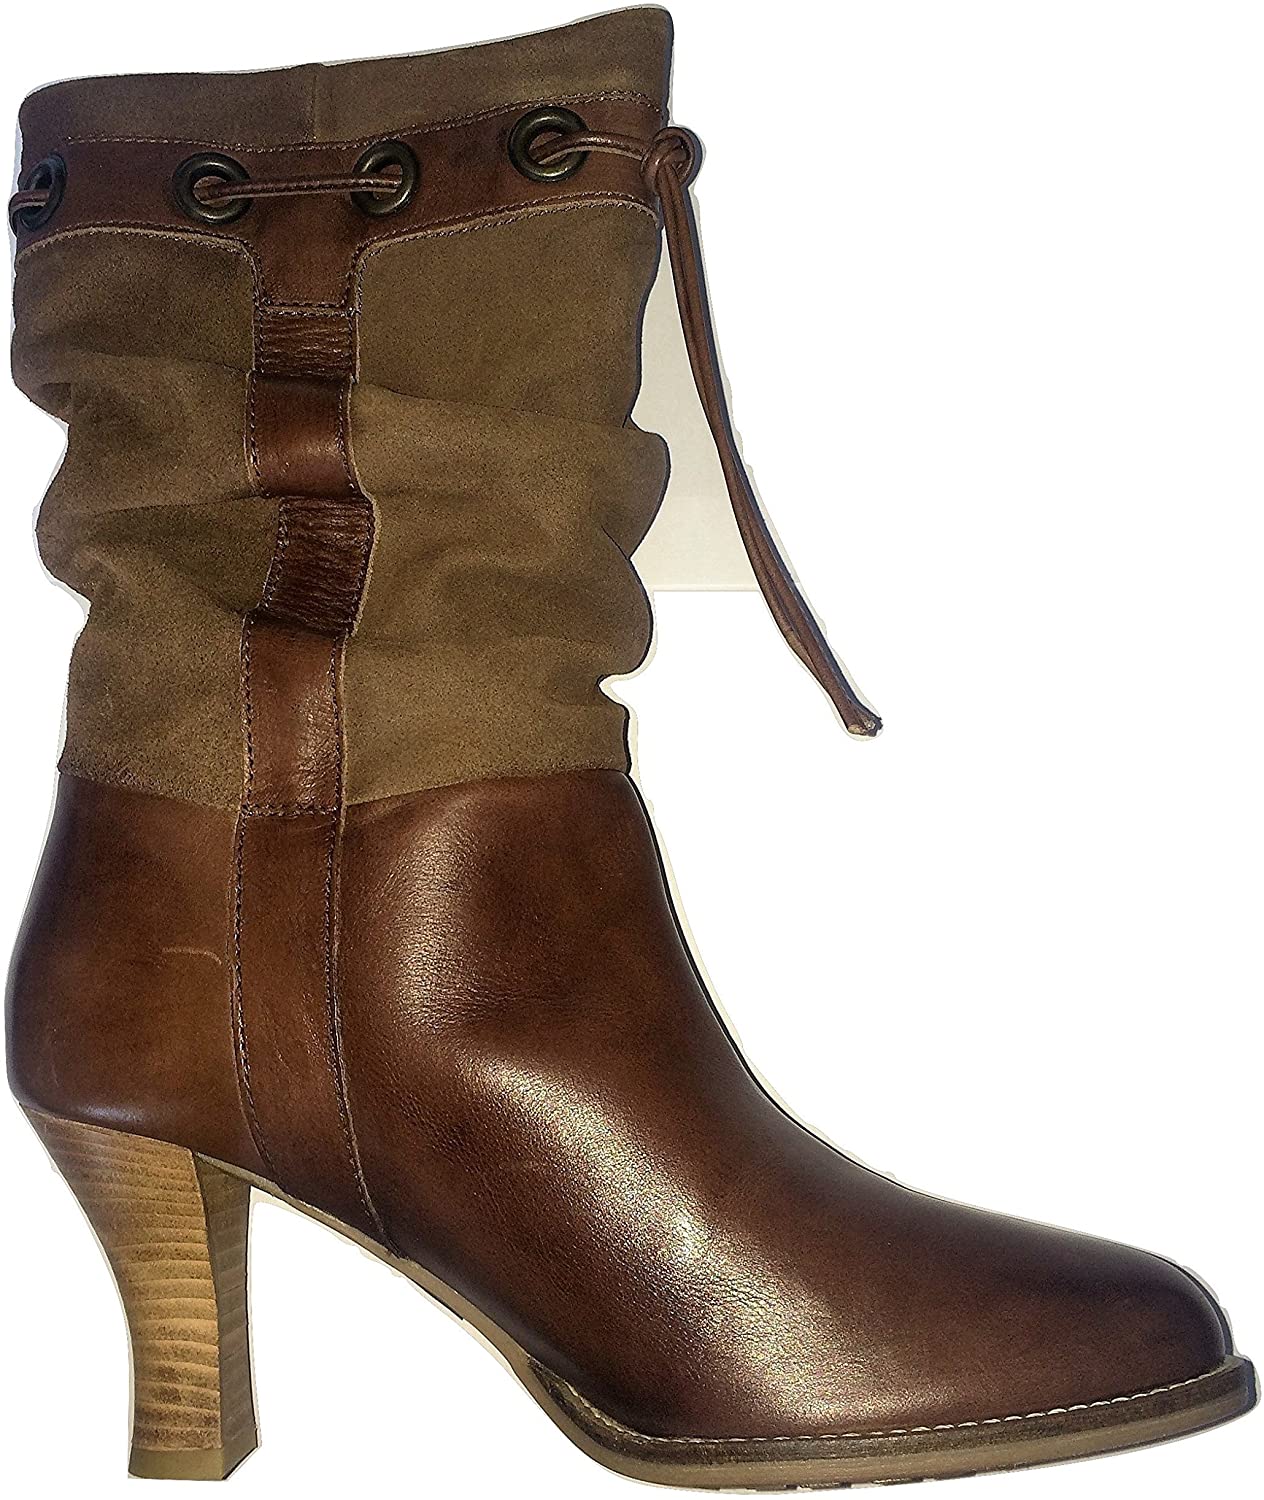 Faith Light Brown Suede/Leather Stuck Ring Detail Tassle Boots